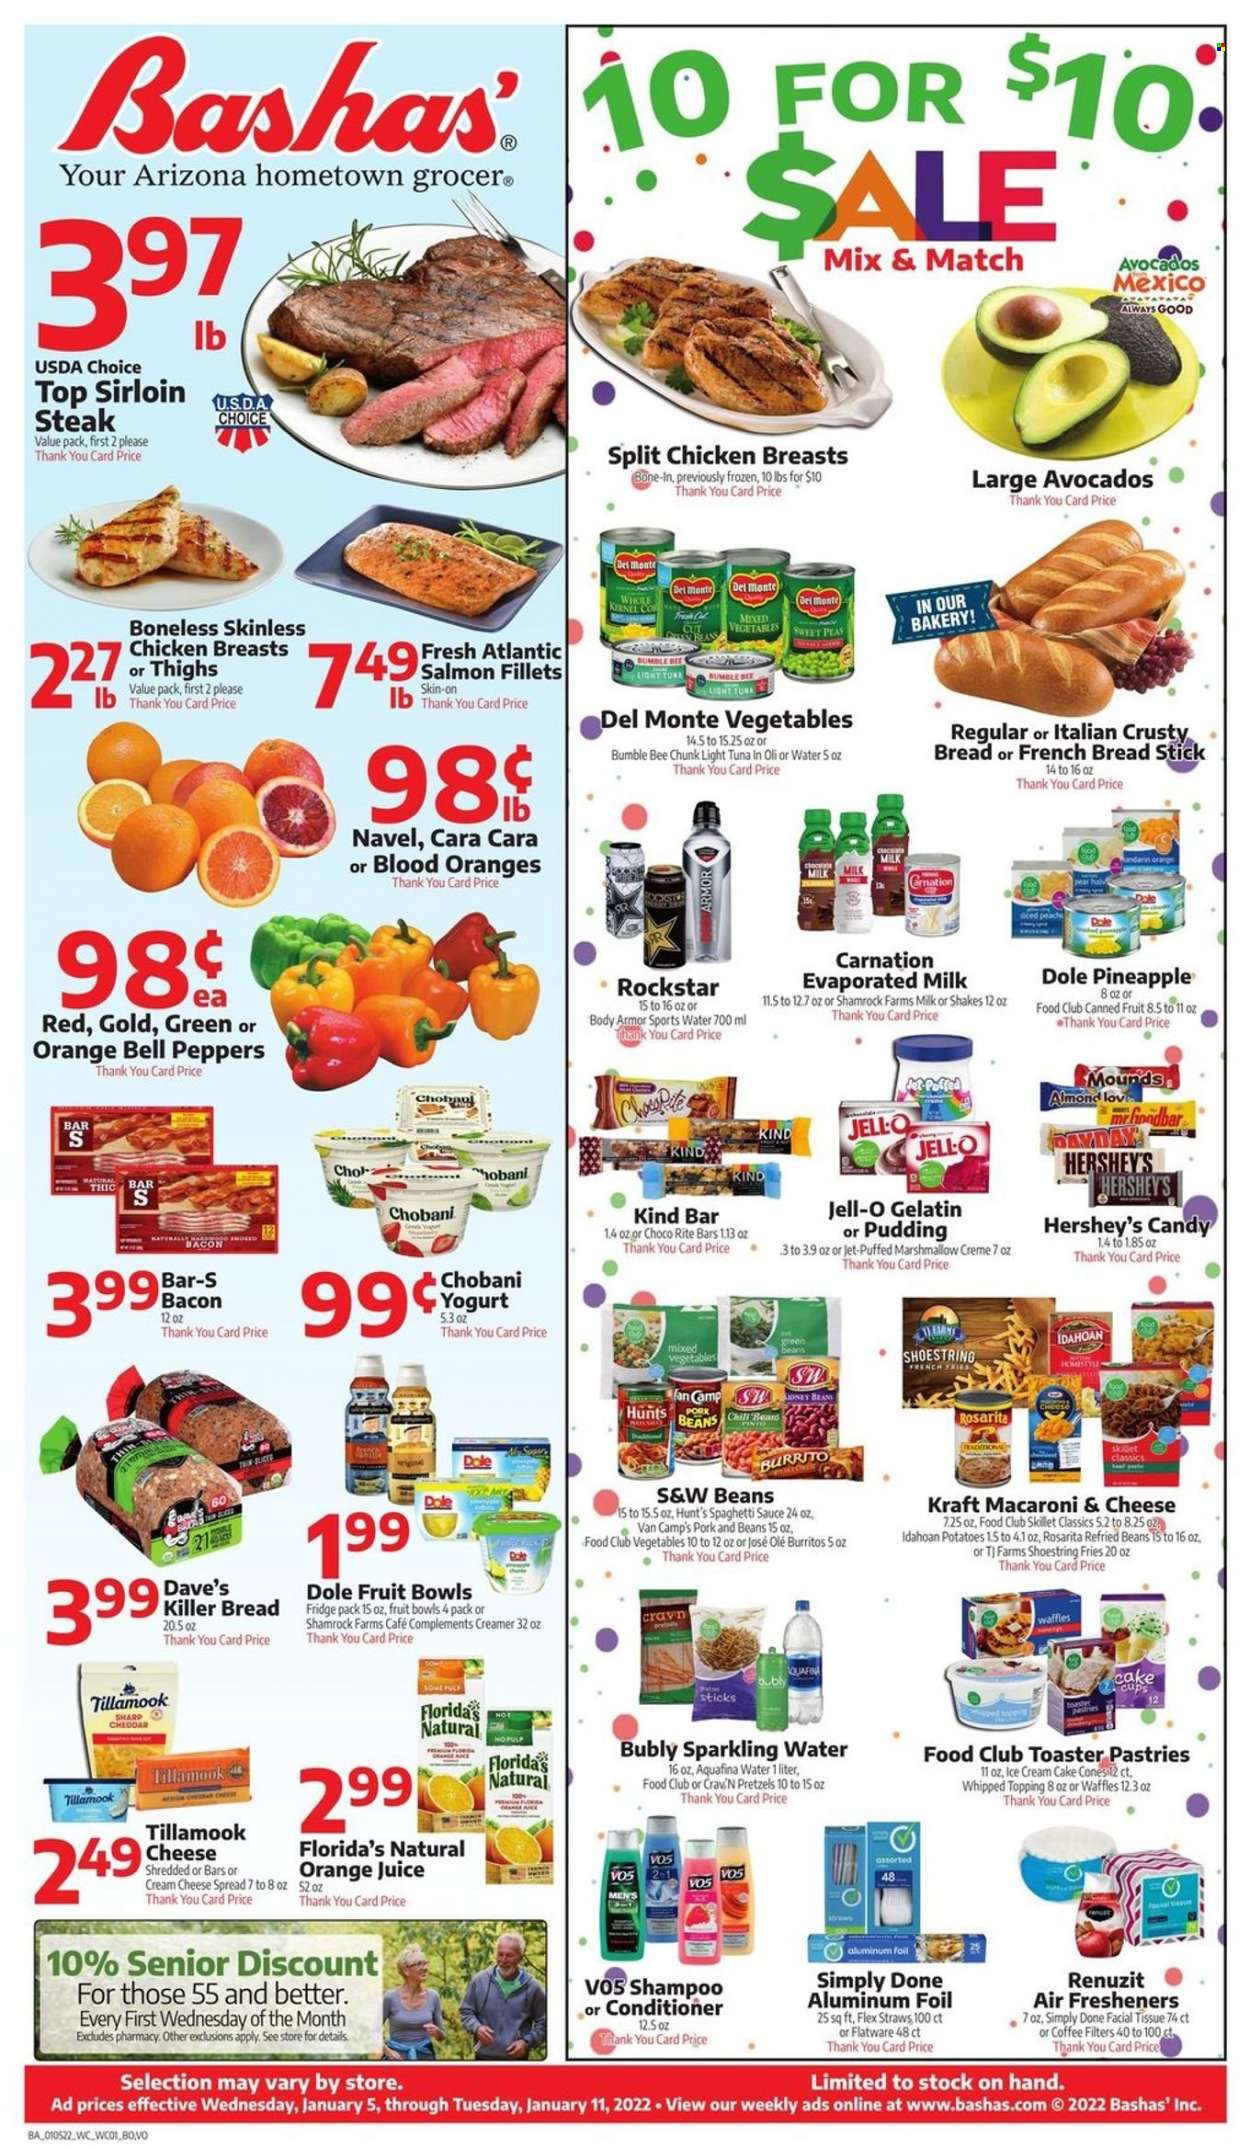 thumbnail - Bashas' Flyer - 01/05/2022 - 01/11/2022 - Sales products - bread, pretzels, cake, french bread, waffles, bell peppers, peas, Dole, peppers, avocado, pineapple, pears, salmon, salmon fillet, tuna, macaroni & cheese, spaghetti, Bumble Bee, sauce, burrito, Kraft®, spaghetti sauce, cheese spread, pudding, yoghurt, Chobani, evaporated milk, shake, creamer, ice cream, Hershey's, mixed vegetables, potato fries, marshmallows, milk chocolate, Florida's Natural, topping, Jell-O, refried beans, light tuna, canned fruit, orange juice, juice, Body Armor, Rockstar, Aquafina, sparkling water, coffee, chicken breasts, beef sirloin, steak, sirloin steak, tissues, Jet, shampoo, conditioner, VO5. Page 1.